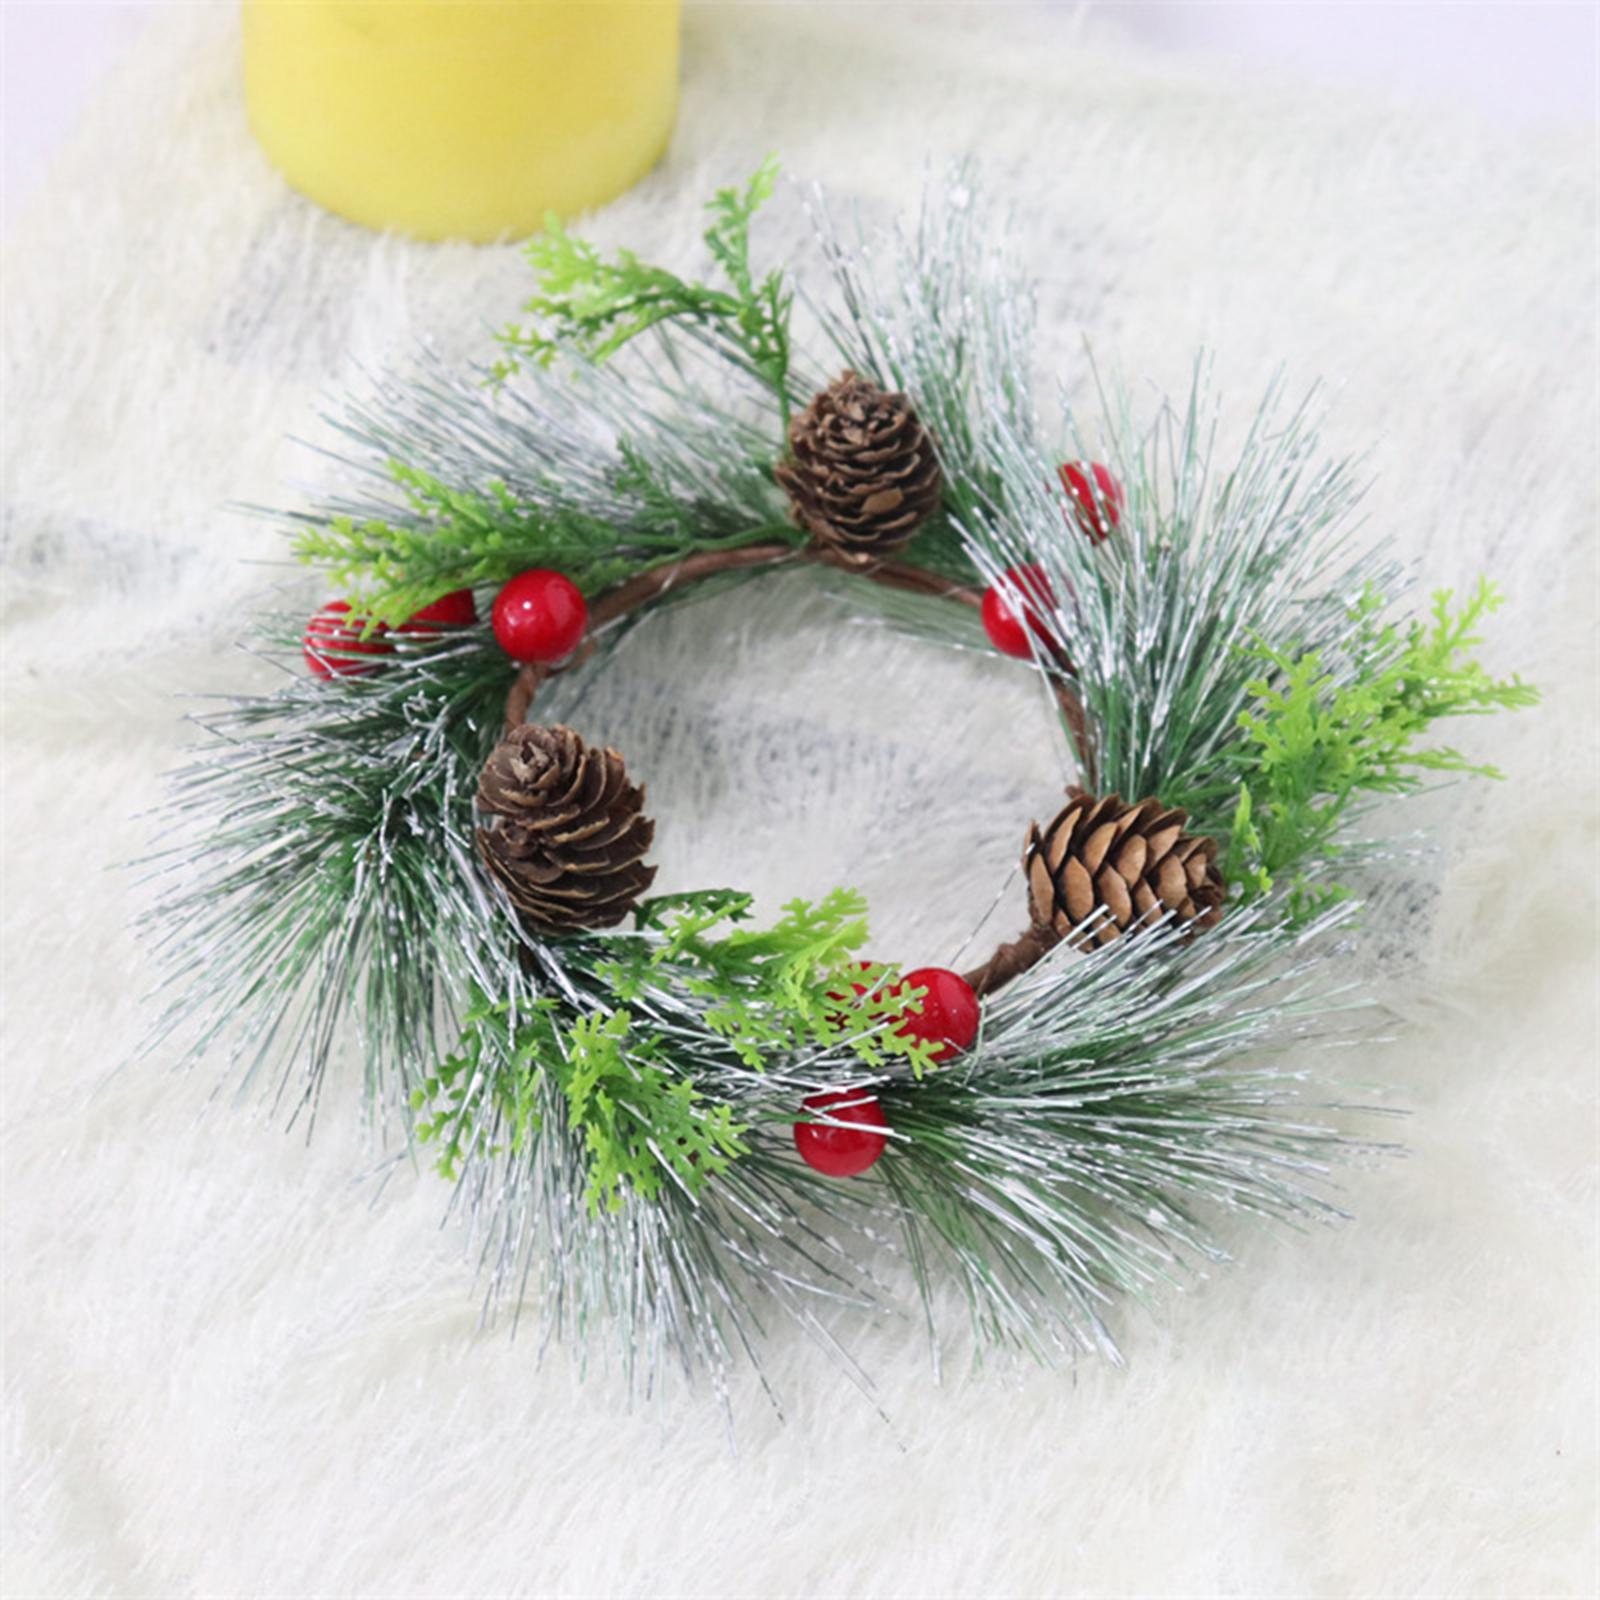 Candle Rings Mini Wreaths Simulation Wreaths Bar Greenery Candle Rings Decor